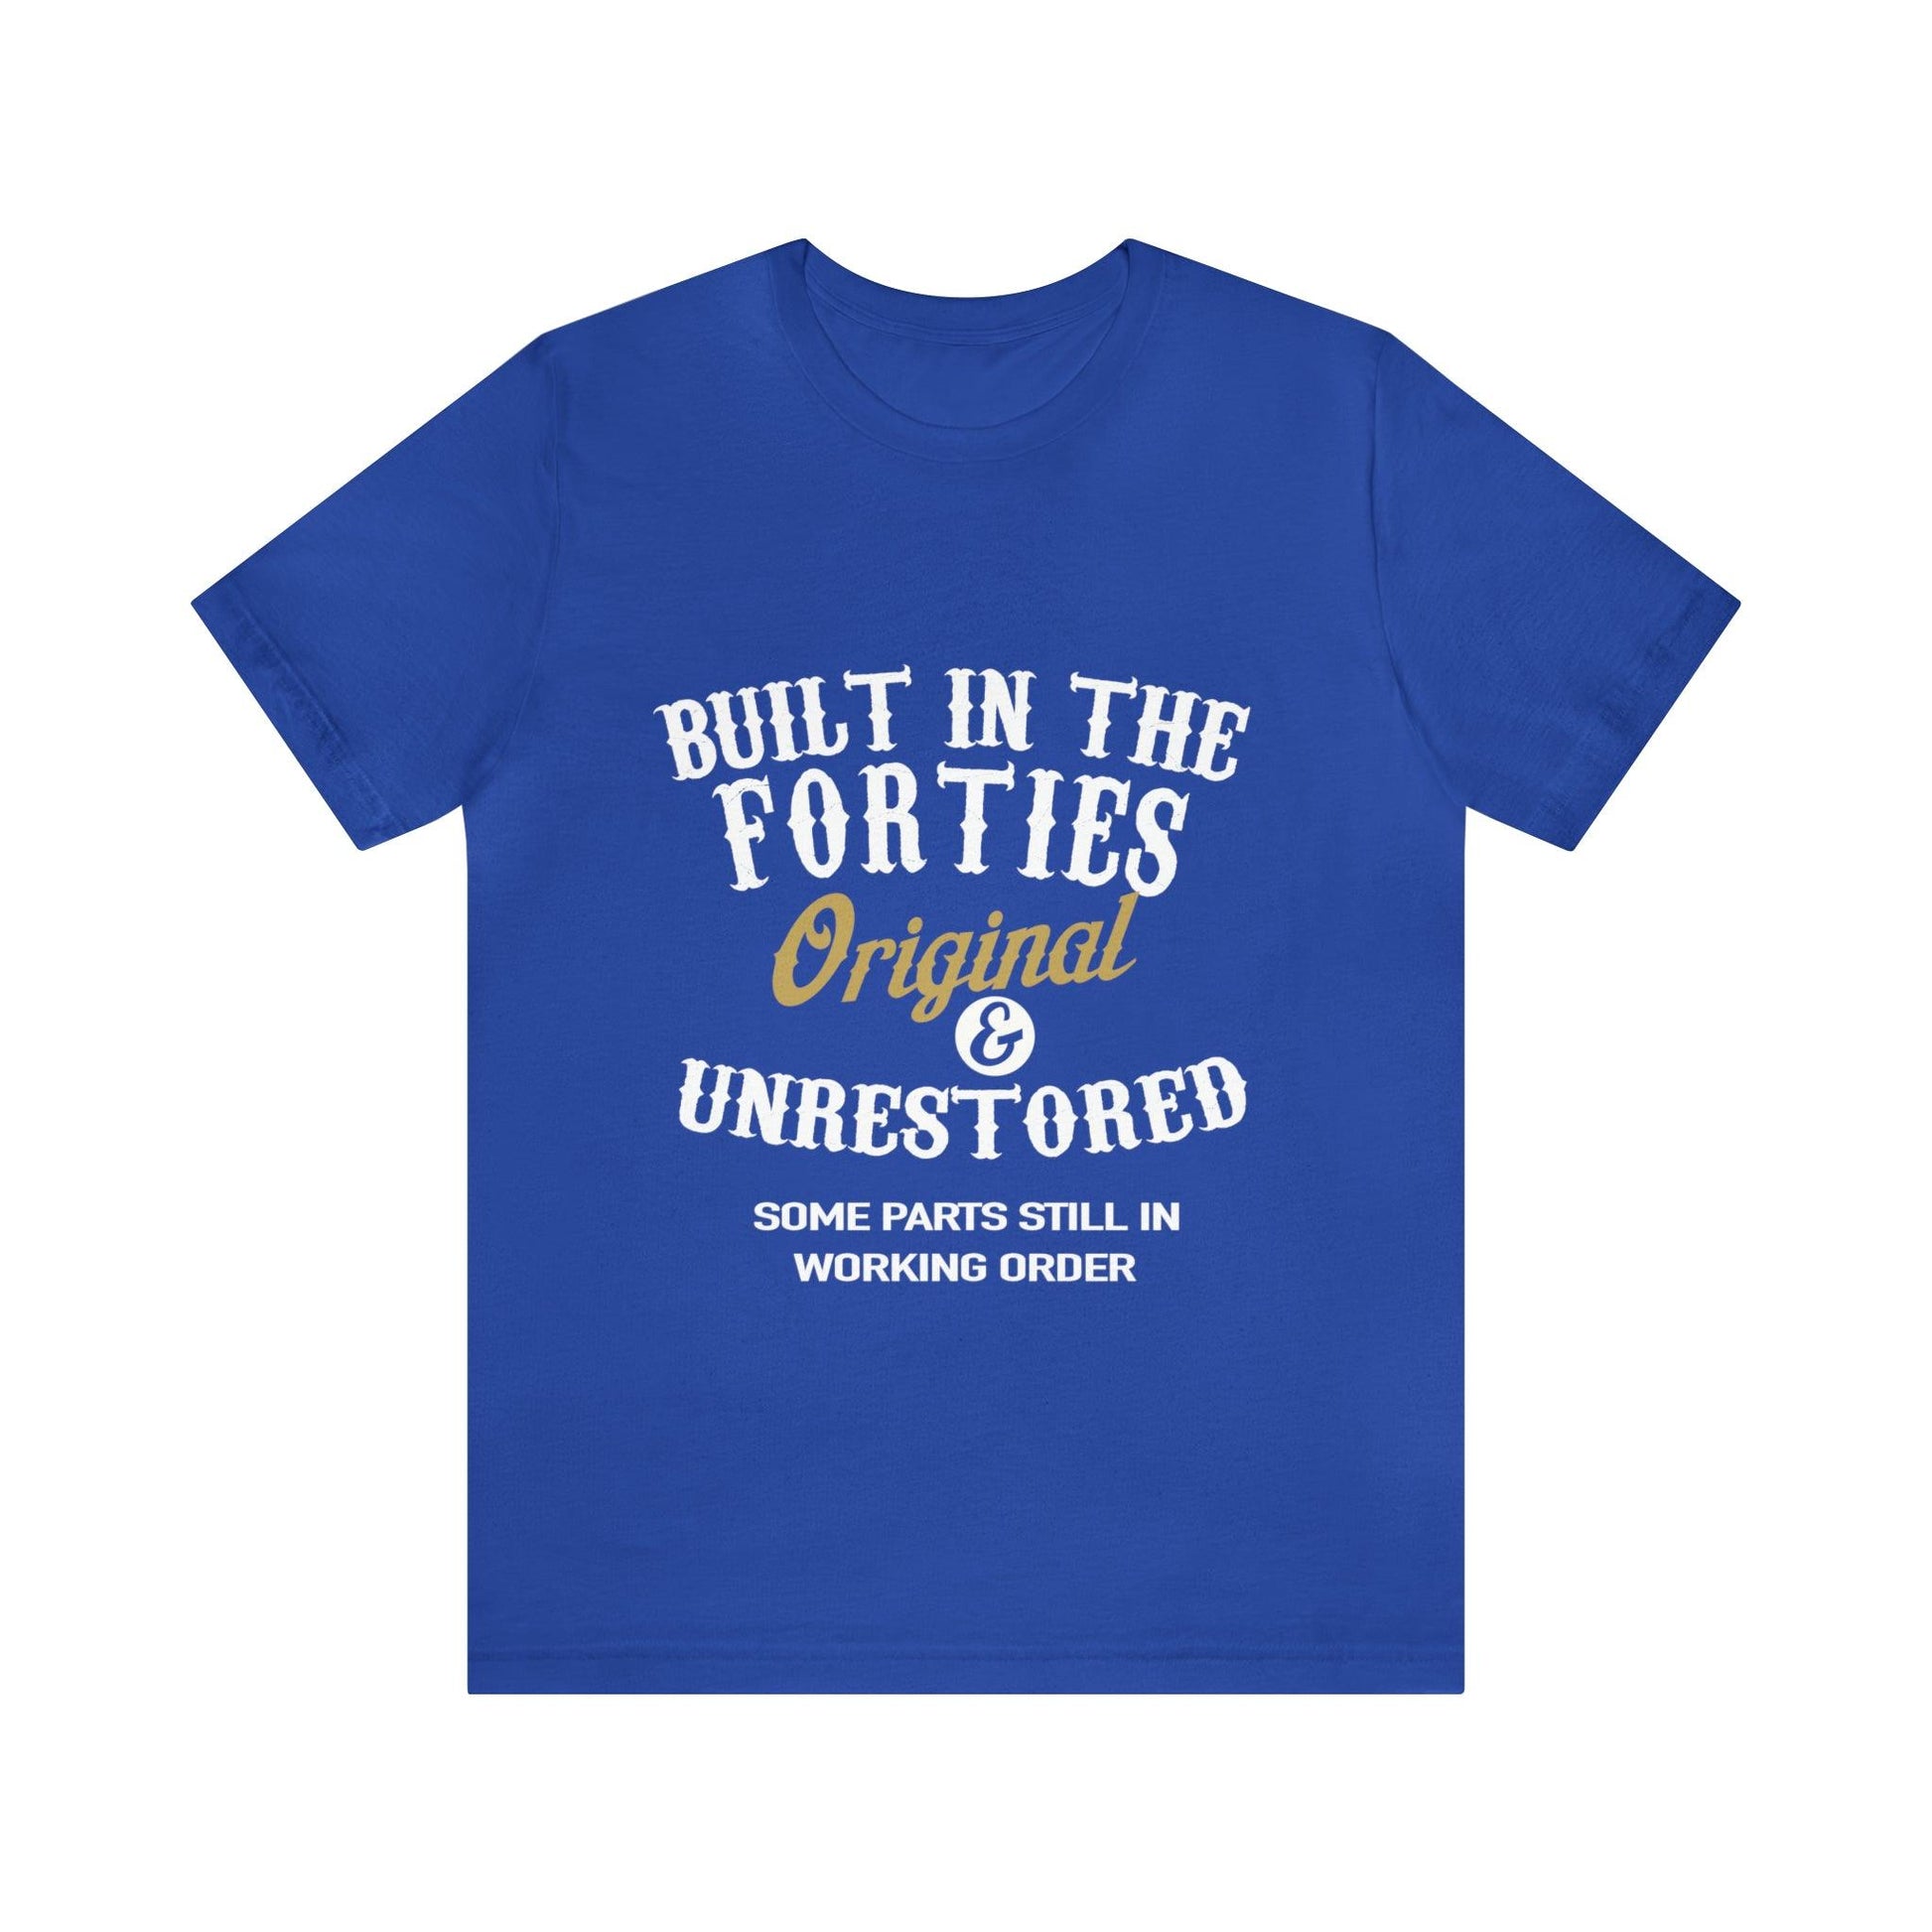 Classic Fortitude: The Witty T-shirt for Spirited 1940s Survivors - Pandaize